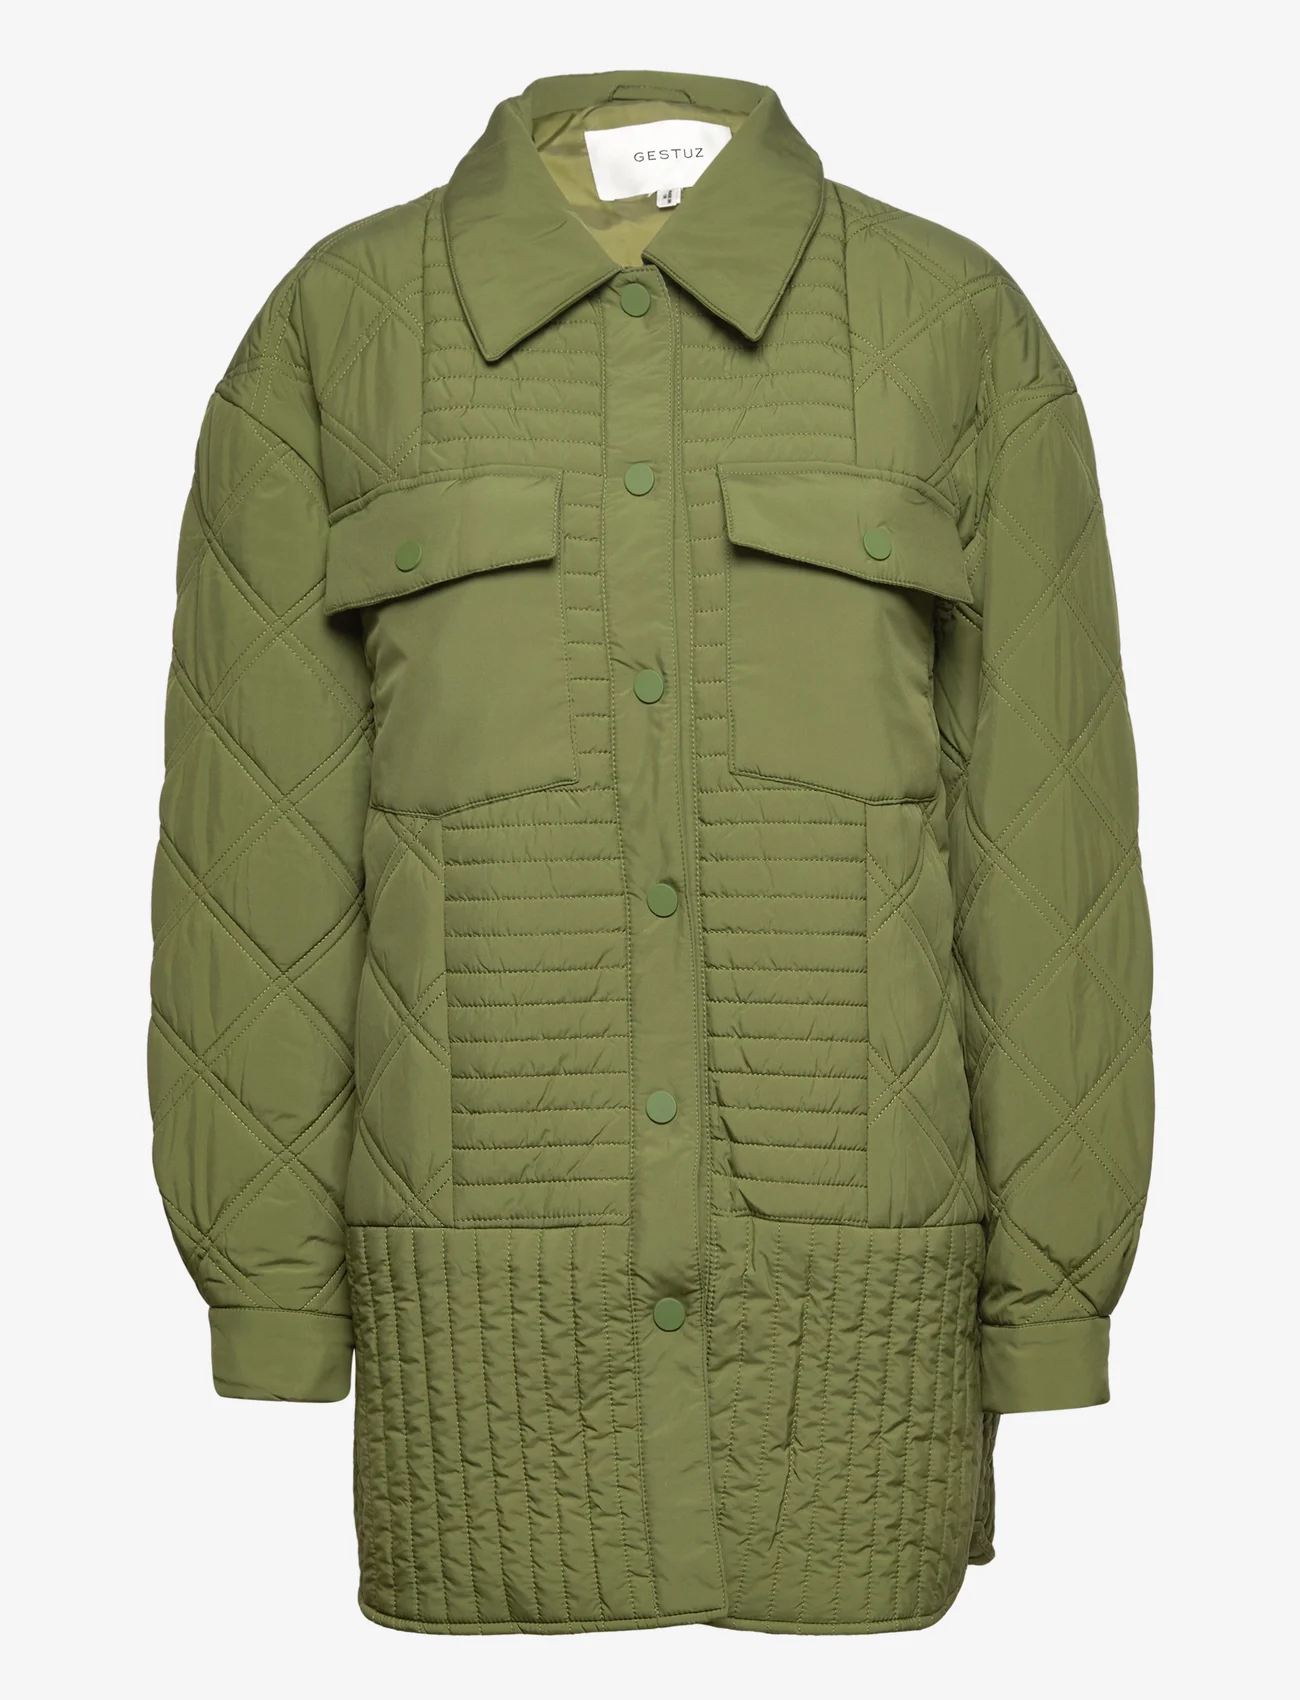 Gestuz - TebaGZ overshirt - quilted jackets - chive - 0